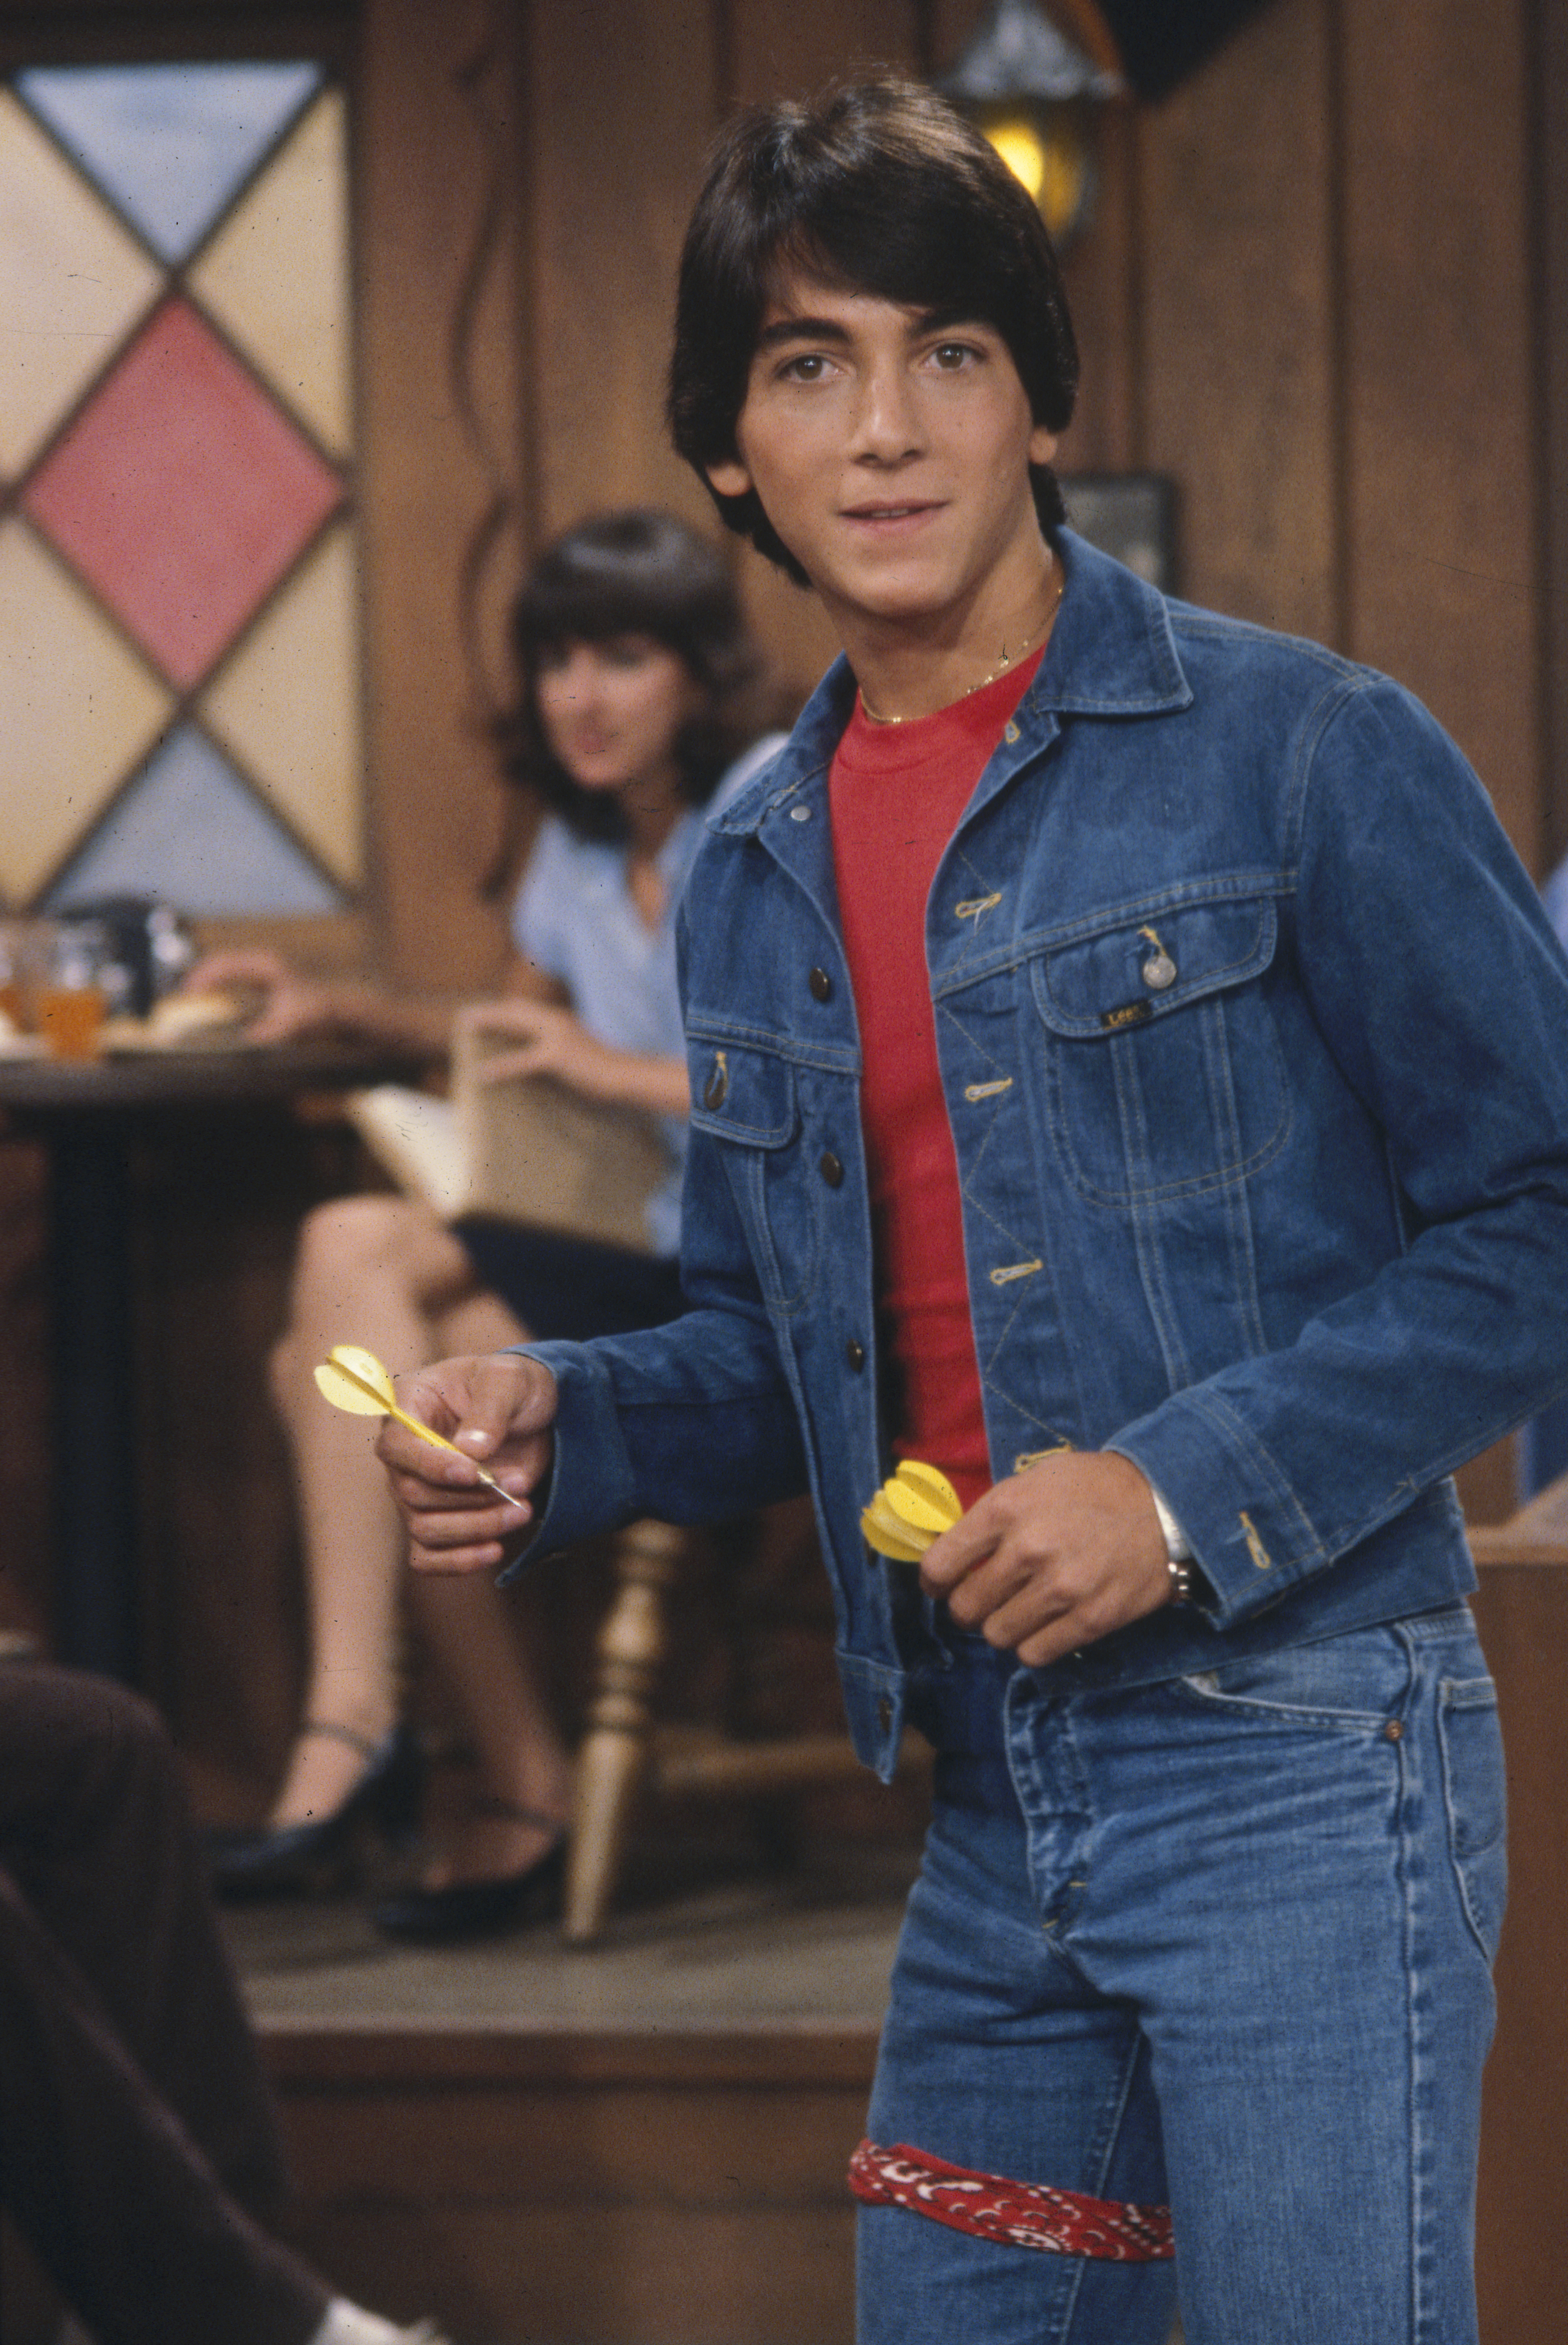 Scott Baio on "Happy Days" in 1981 | Source: Getty Images